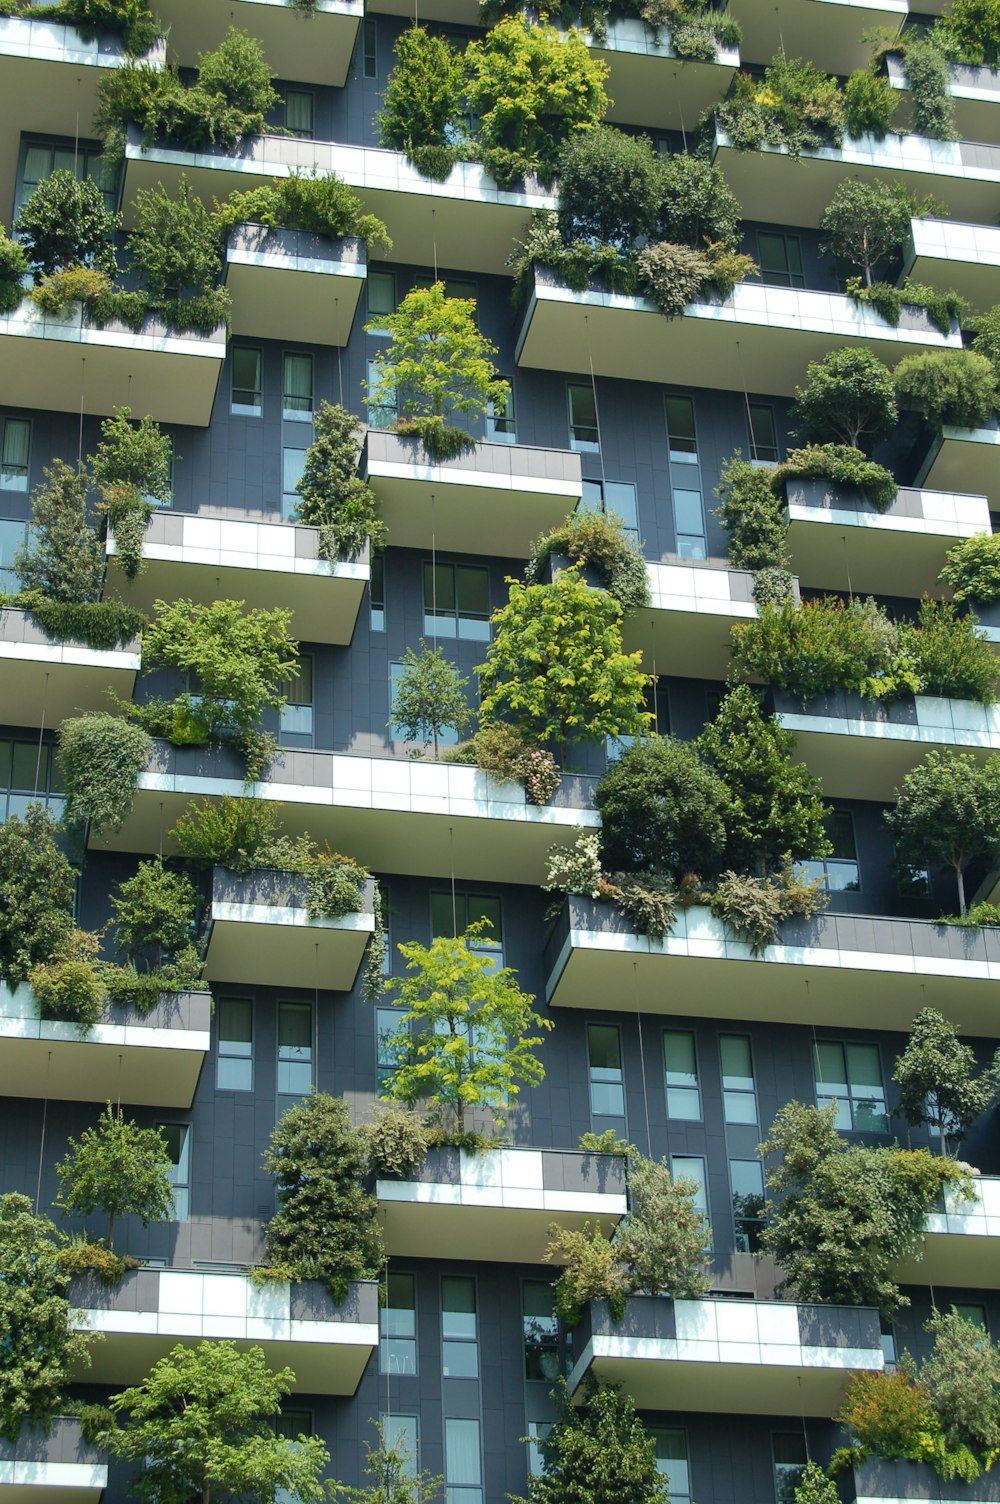 low angle photo of gray building with green plants